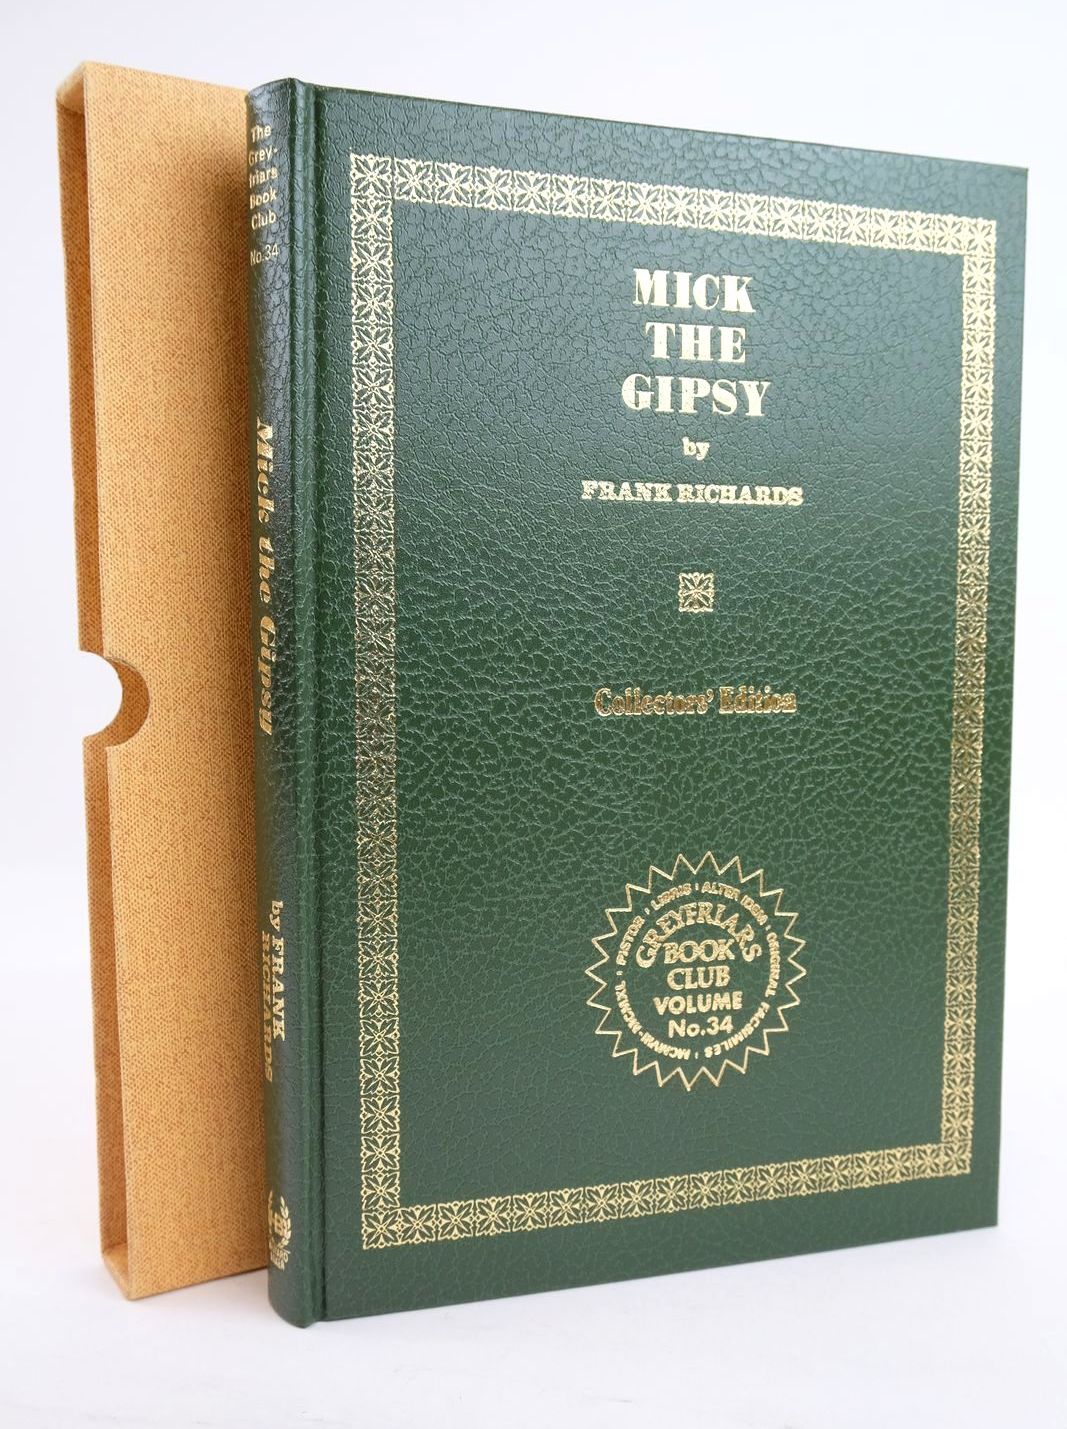 Photo of MICK THE GIPSY written by Richards, Frank published by Howard Baker Press (STOCK CODE: 1319793)  for sale by Stella & Rose's Books